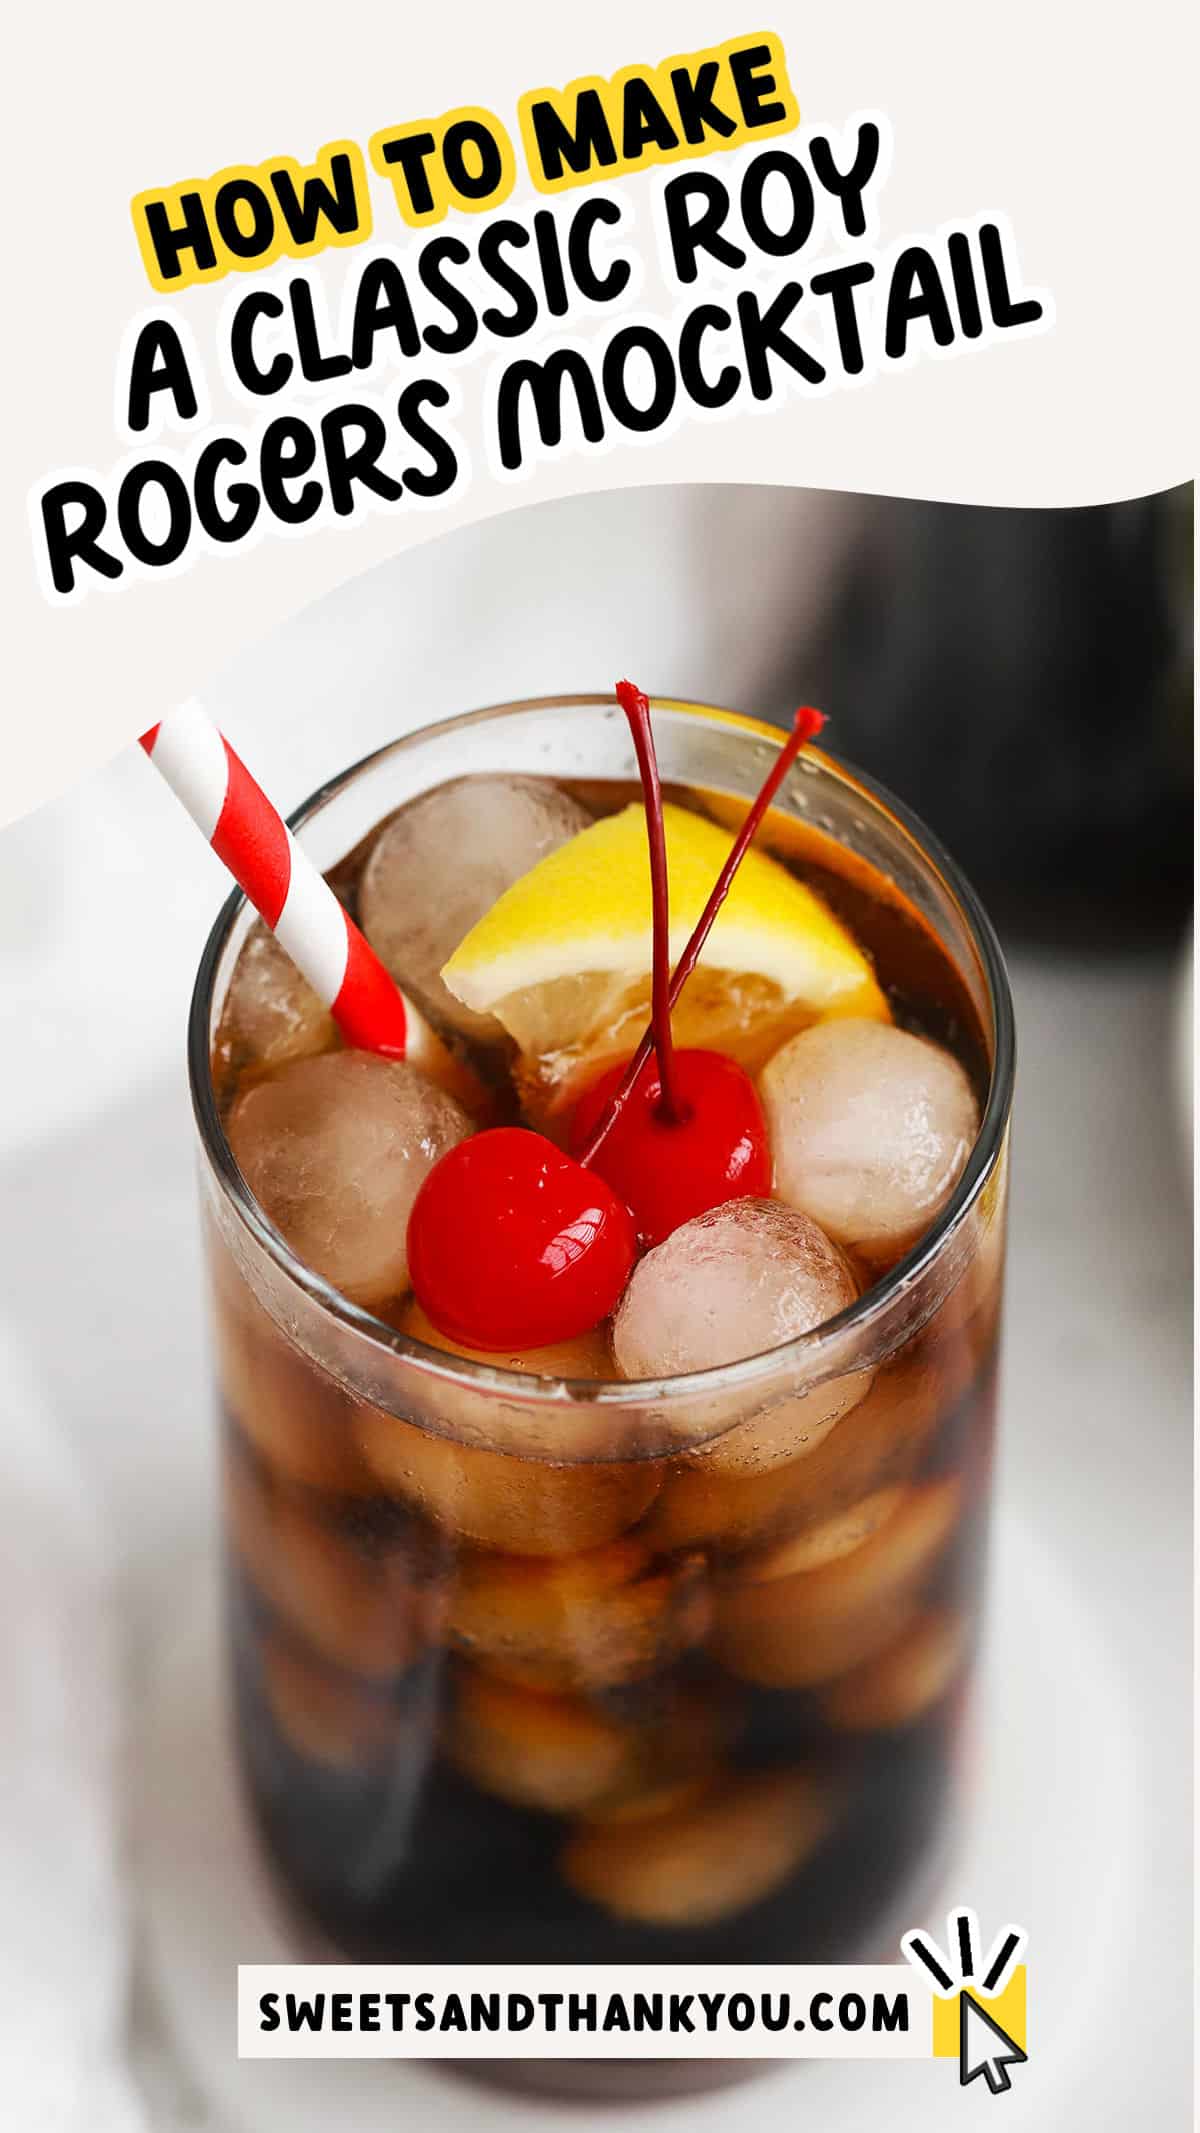 Learn how to make a Roy Rogers drink! This classic mocktail recipe is made with just 2-3 ingredients and makes a fun addition to parties and celebrations. While the basic recipe for this cola mocktail might be a famous kids mocktail recipe, we've also got a delicious lower sugar twist that's perfect for grown-ups. Get the recipe + more tips and classic mocktail recipes to try at sweetsandthankyou.com